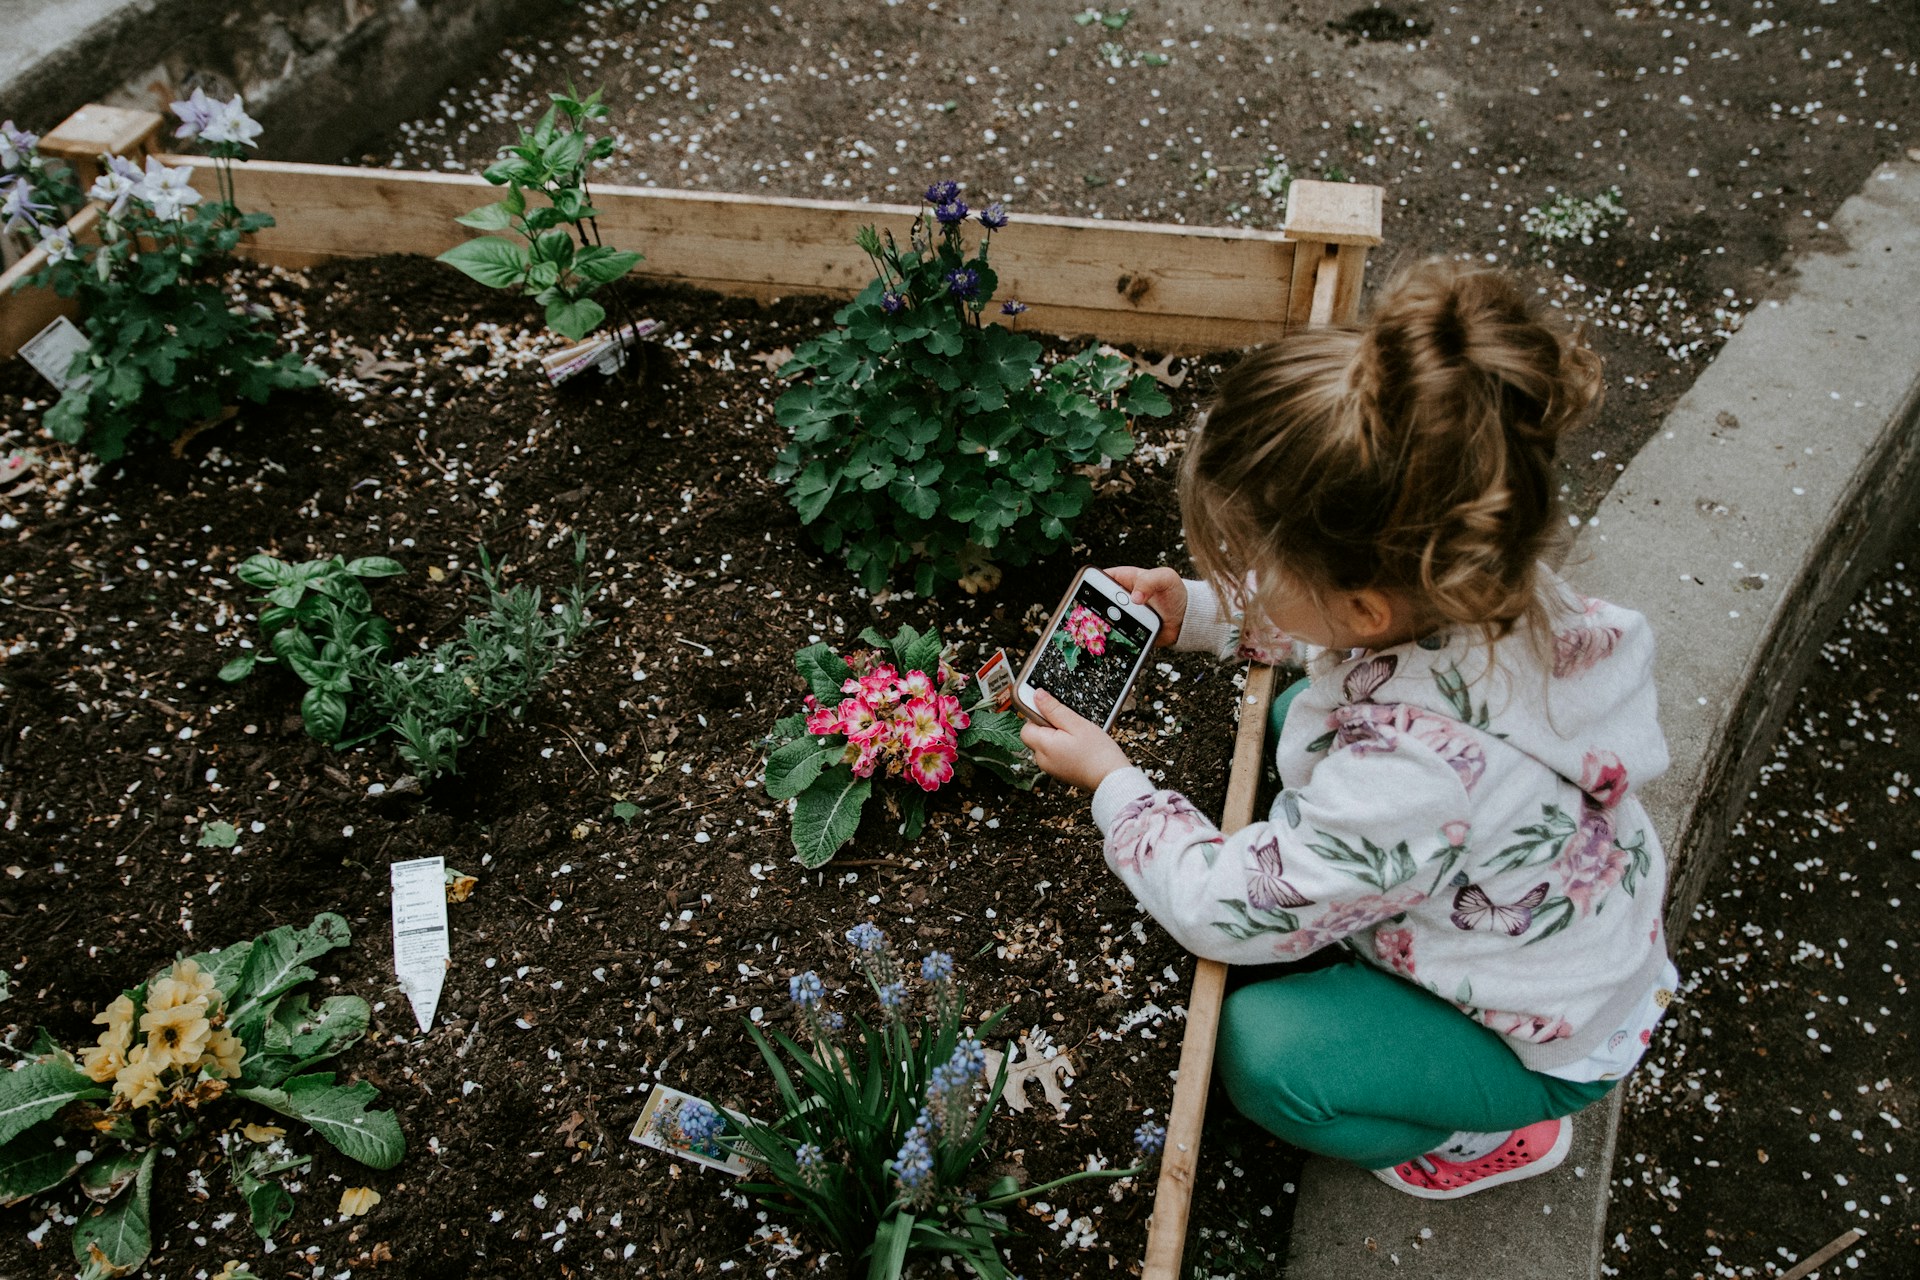 If you see your kid lingering around the house doing nothing and feeling bored, it's a good idea to encourage them to try learning something new or finding a new hobby. Whether it's cooking, gardening, reading, or playing a musical instrument, learning new skills can be just as fun as it is rewarding.